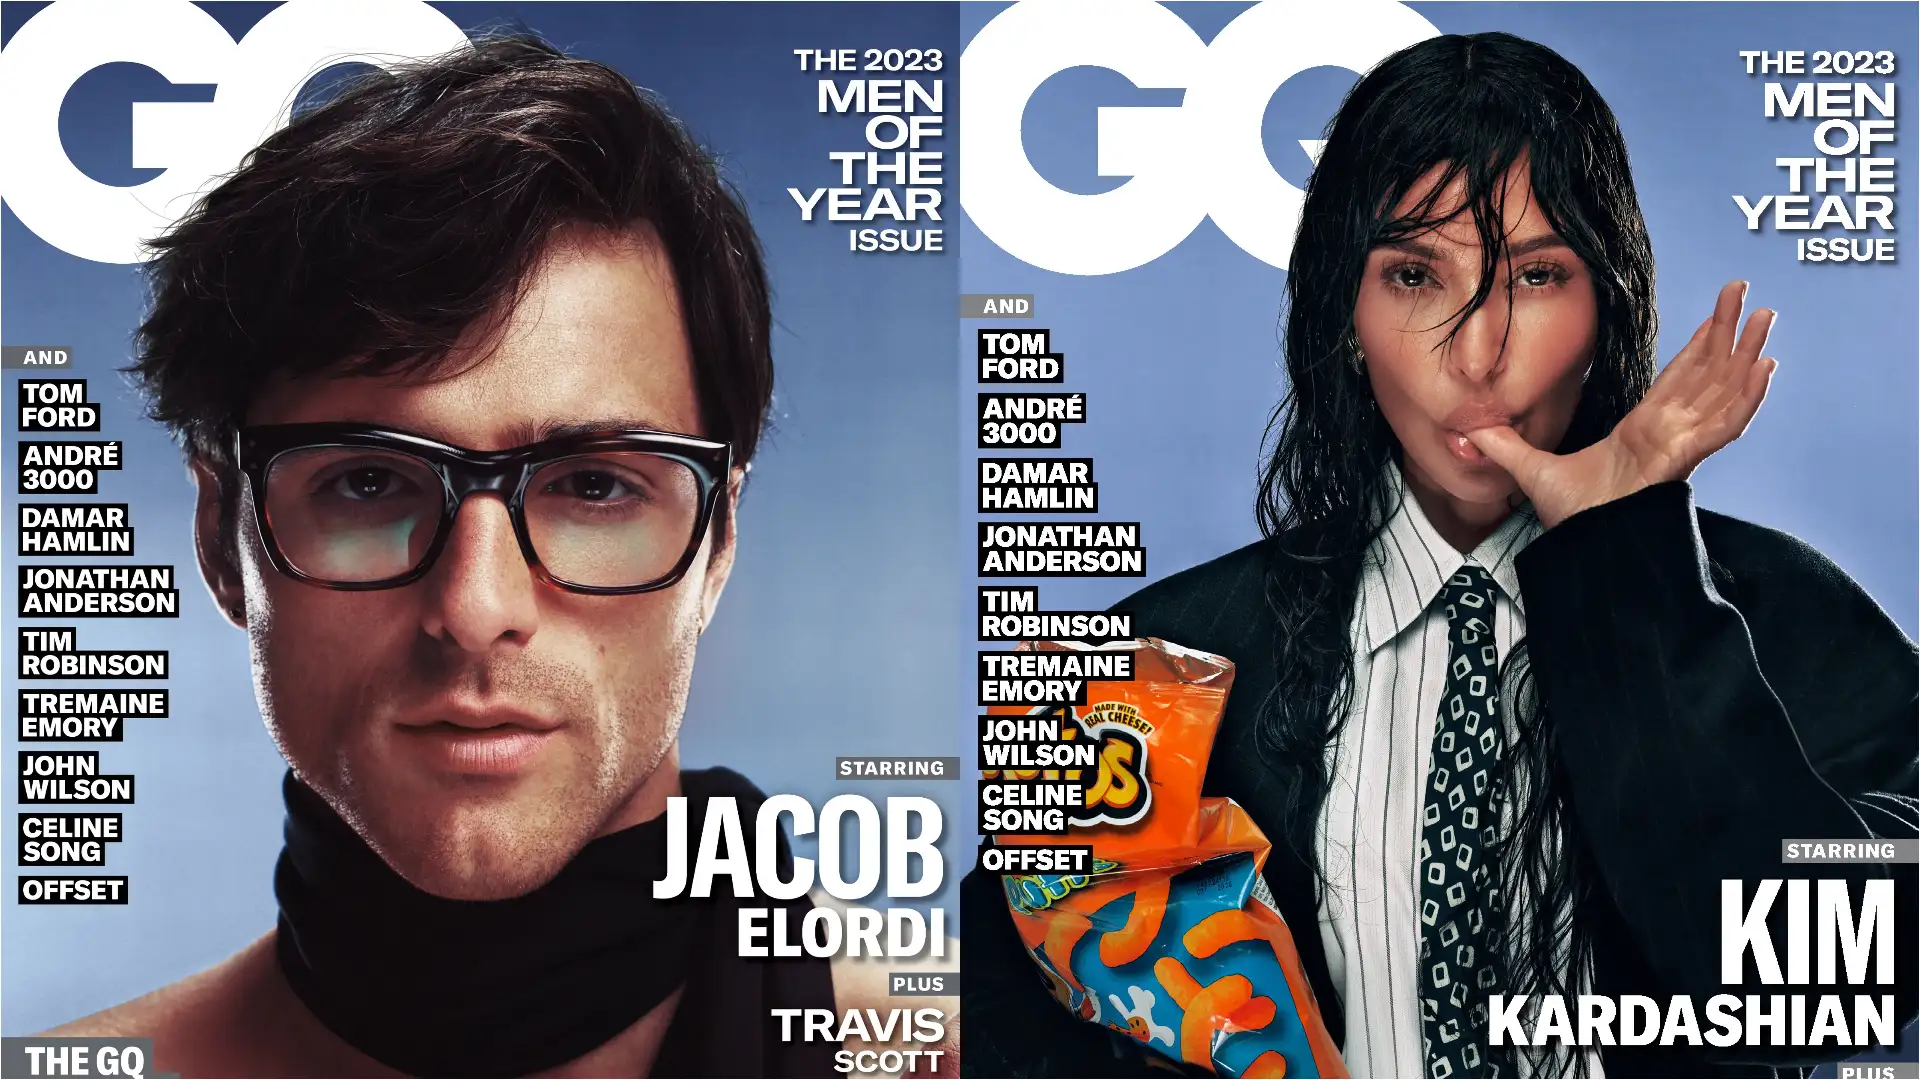 How To Cancel GQ Magazine Subscription?